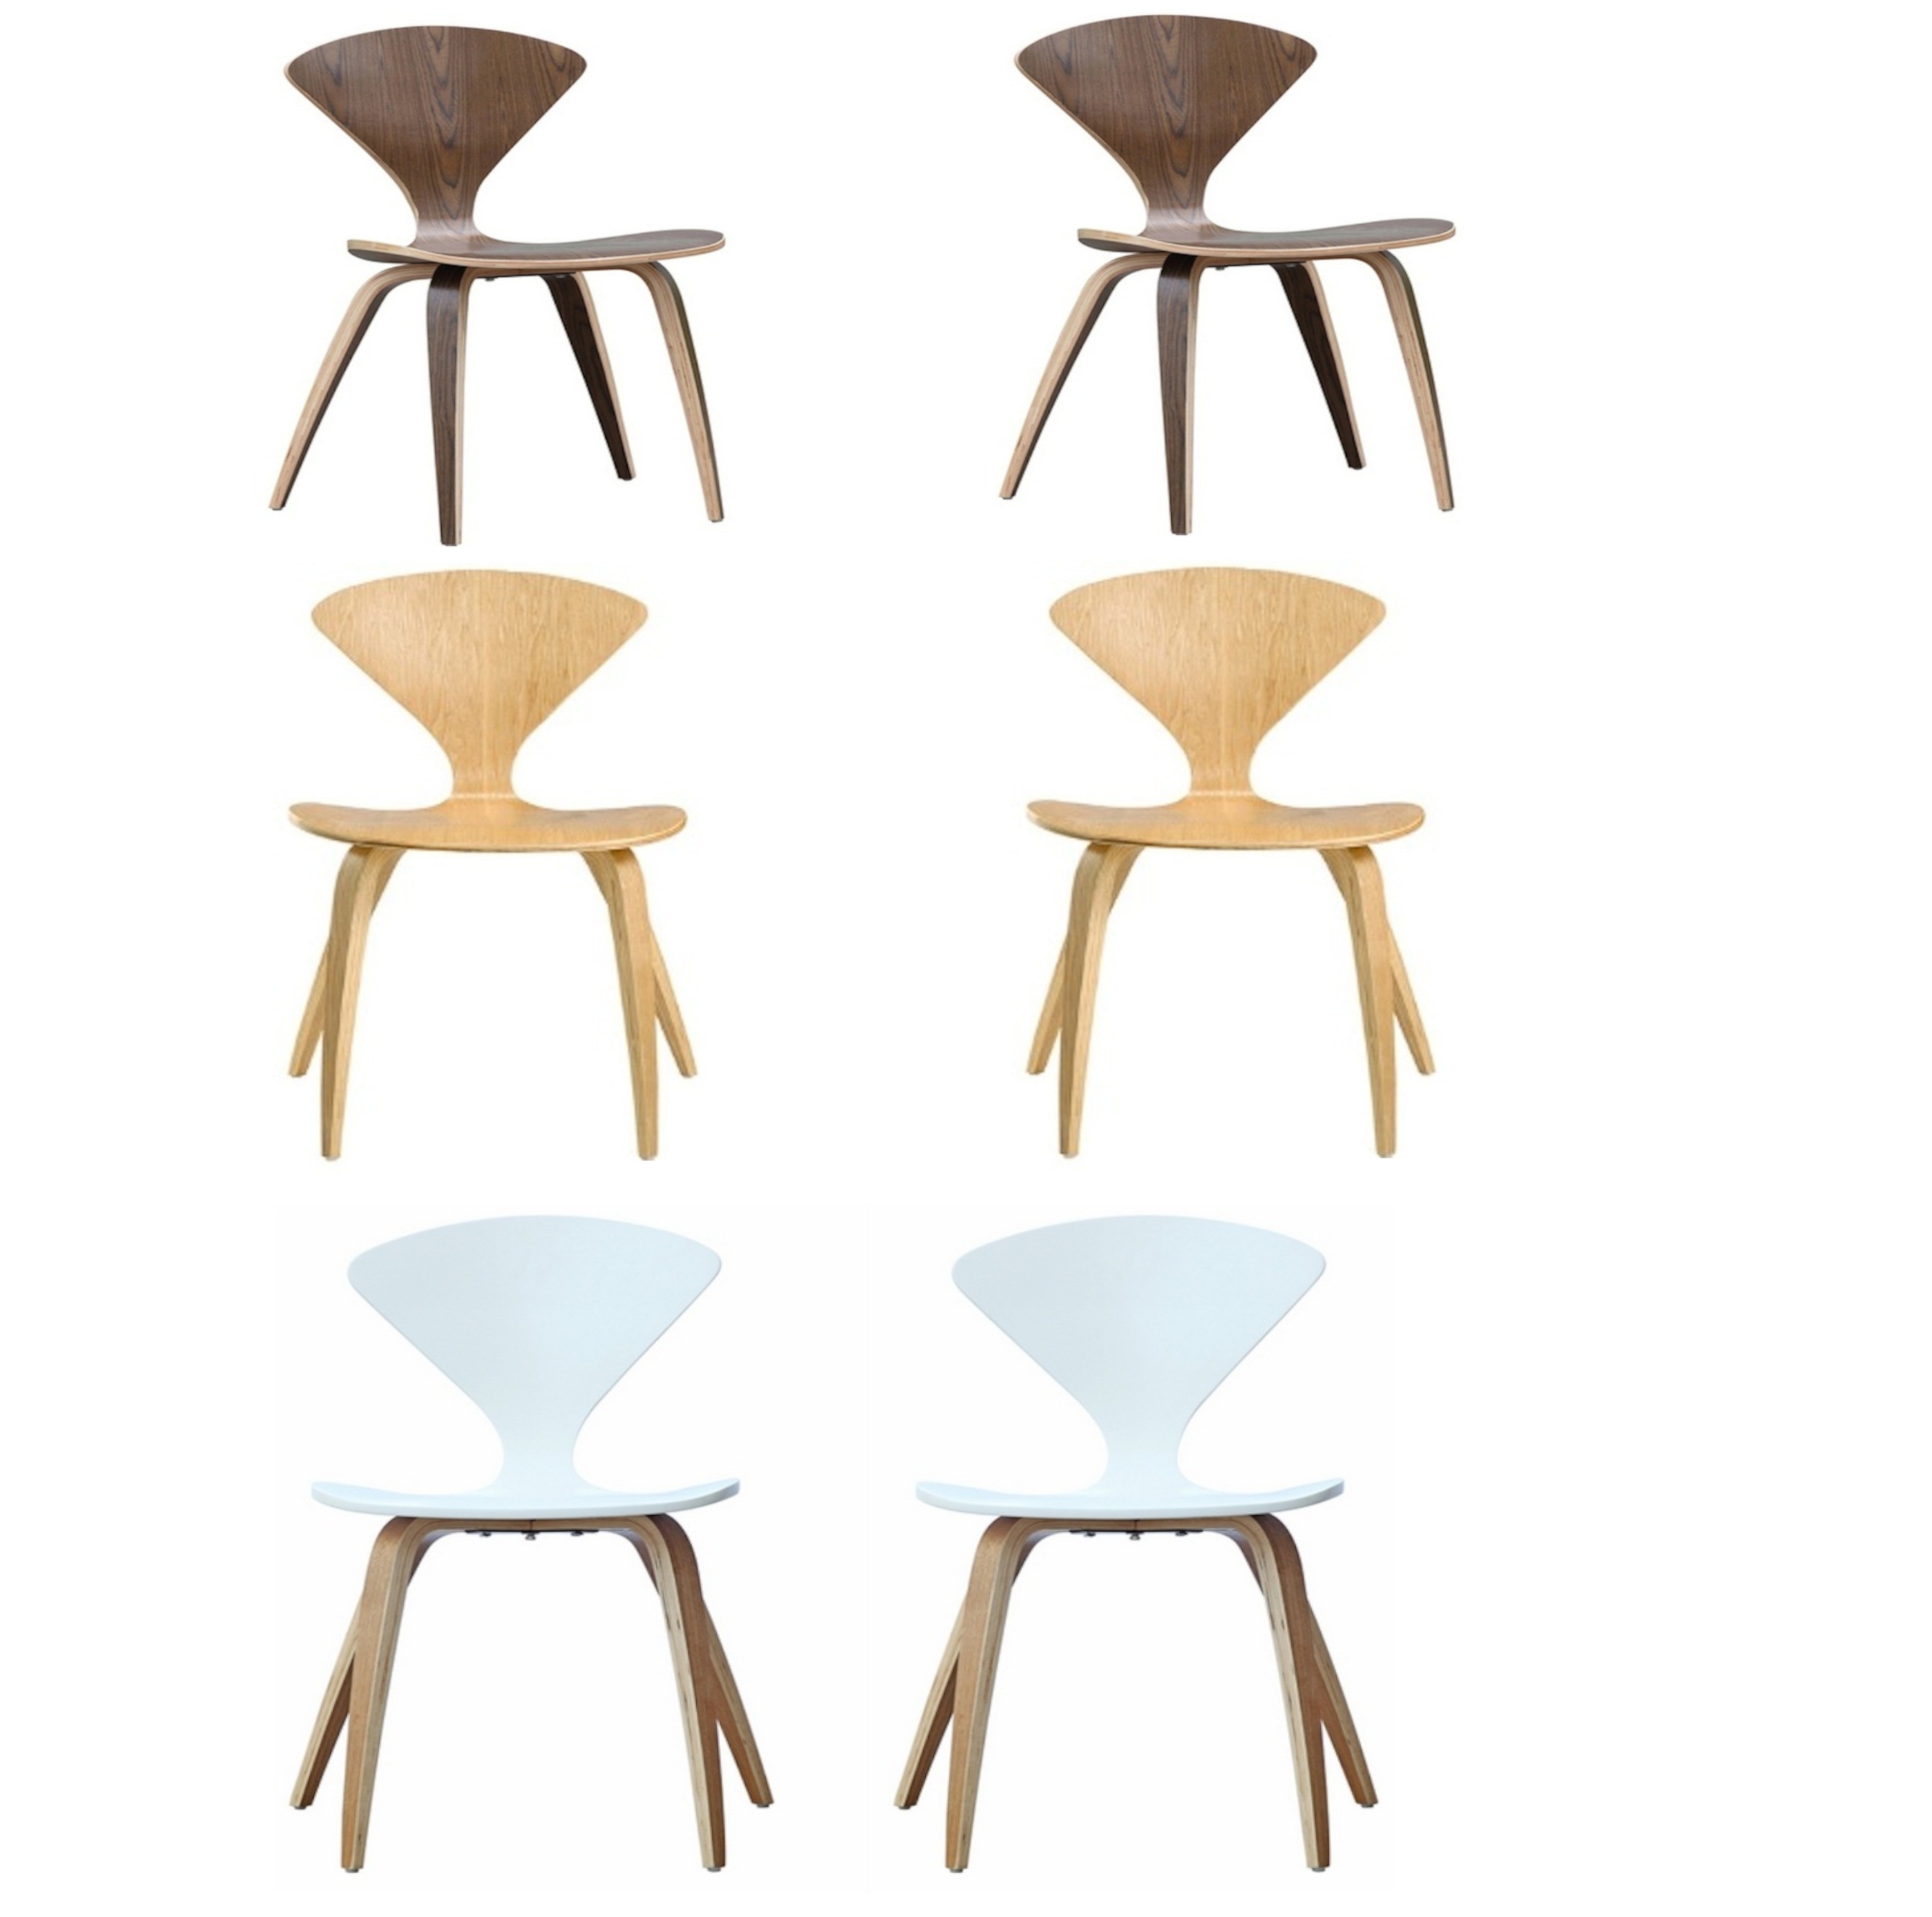 Norman Inspired Nat Wal Wht Molded Plywood Accent Dining Chair 1 Or Set Of 2 Ebay,Lunches For Kids At Home